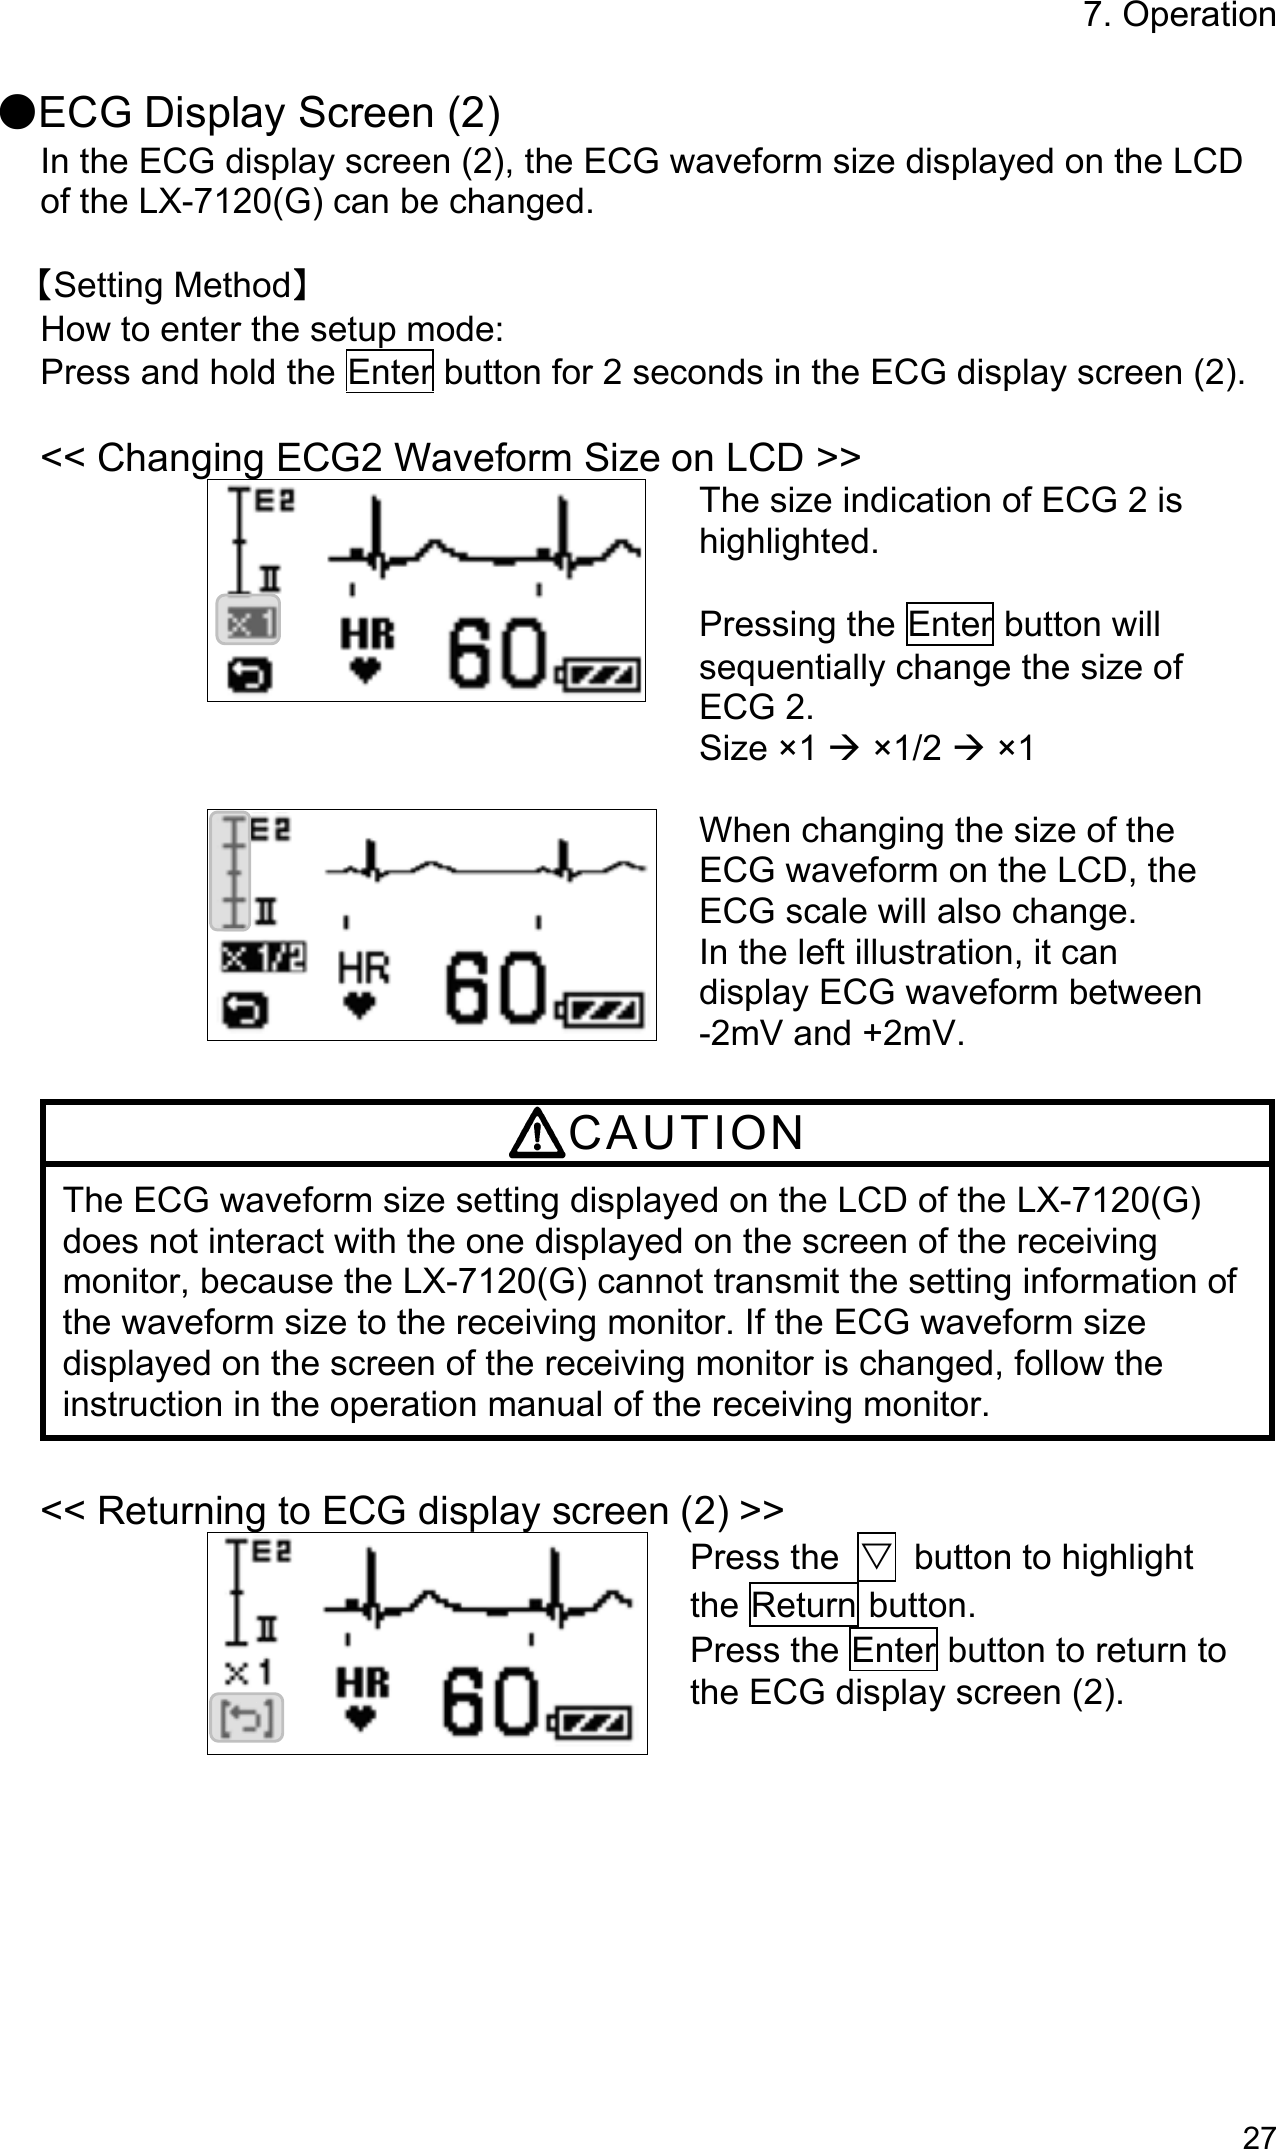 7. Operation 27  ●ECG Display Screen (2) In the ECG display screen (2), the ECG waveform size displayed on the LCD of the LX-7120(G) can be changed.  【Setting Method】 How to enter the setup mode: Press and hold the Enter button for 2 seconds in the ECG display screen (2).  &lt;&lt; Changing ECG2 Waveform Size on LCD &gt;&gt; The size indication of ECG 2 is highlighted.  Pressing the Enter button will sequentially change the size of ECG 2. Size ×1  ×1/2  ×1   When changing the size of the ECG waveform on the LCD, the ECG scale will also change. In the left illustration, it can display ECG waveform between   -2mV and +2mV.  CAUTION The ECG waveform size setting displayed on the LCD of the LX-7120(G) does not interact with the one displayed on the screen of the receiving monitor, because the LX-7120(G) cannot transmit the setting information of the waveform size to the receiving monitor. If the ECG waveform size displayed on the screen of the receiving monitor is changed, follow the instruction in the operation manual of the receiving monitor.  &lt;&lt; Returning to ECG display screen (2) &gt;&gt; Press the  ▽  button to highlight the Return button. Press the Enter button to return to the ECG display screen (2). 